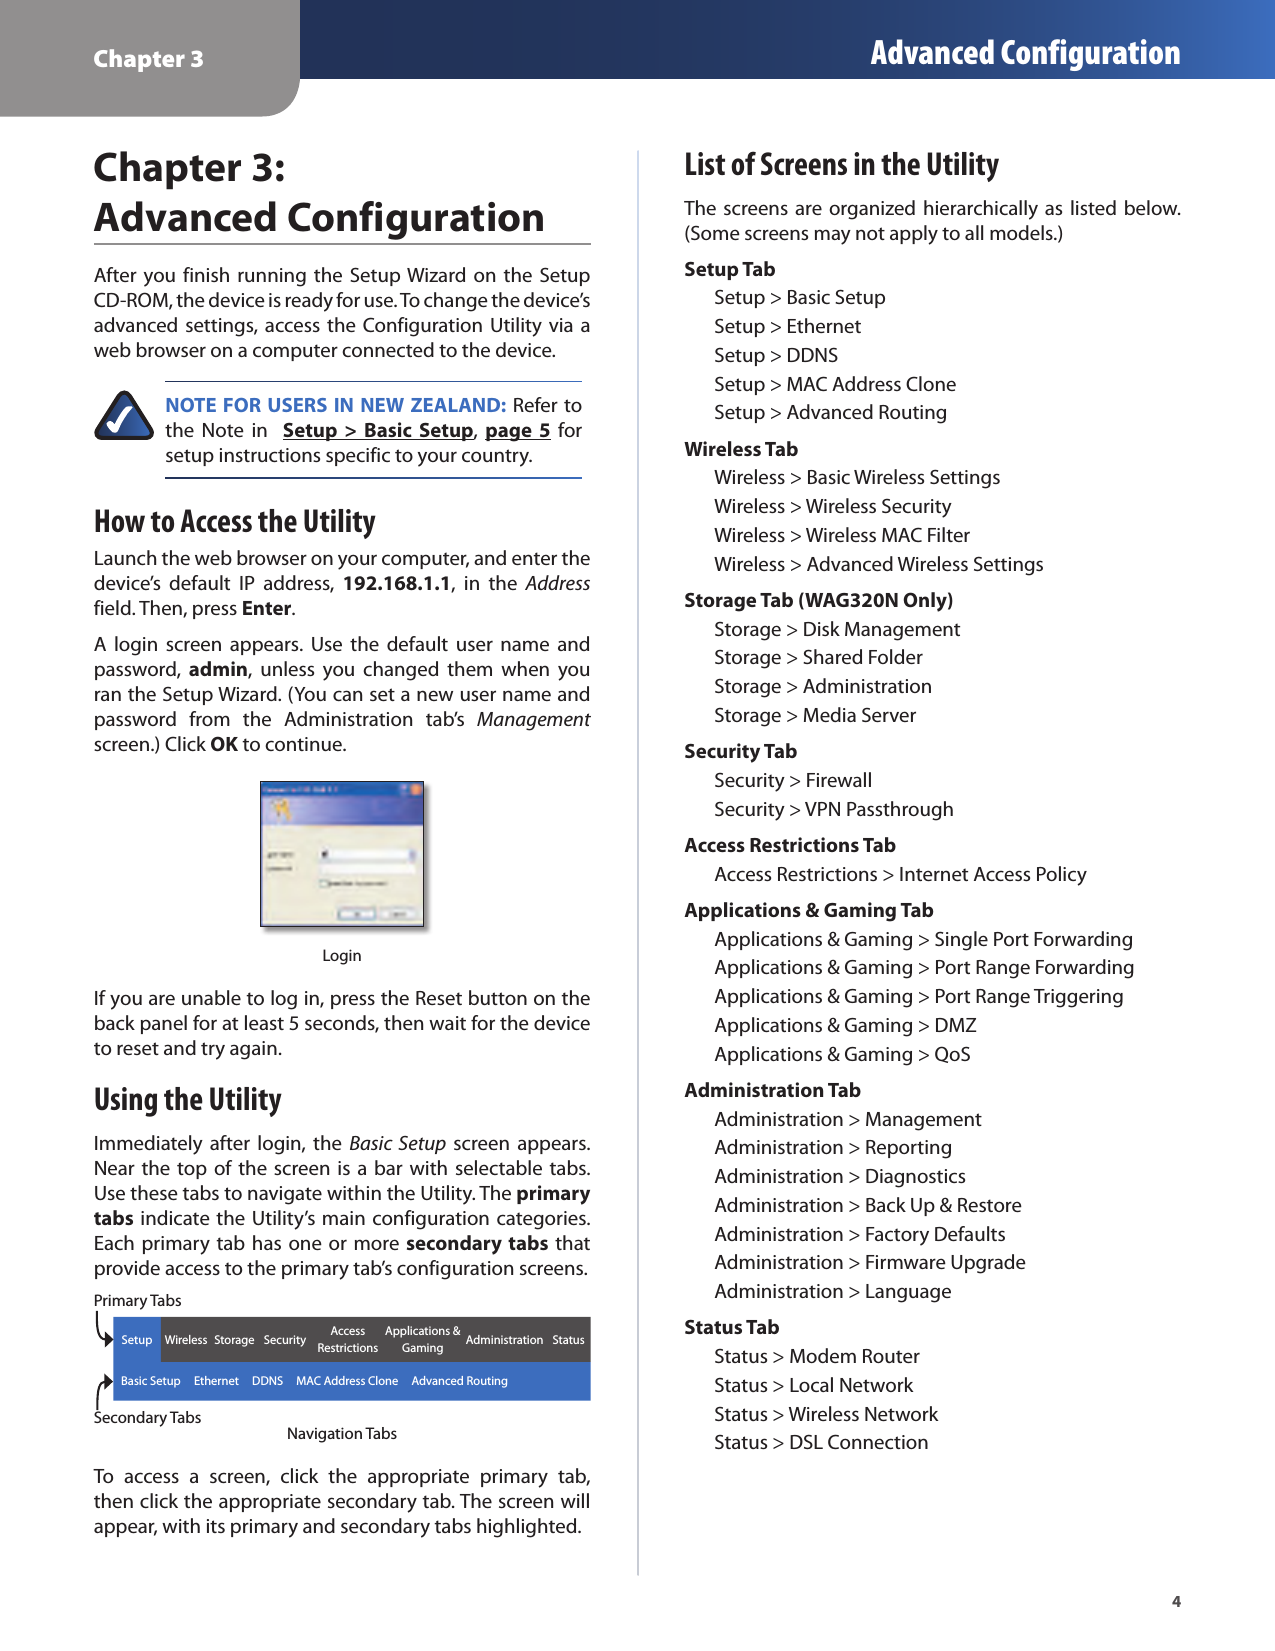 Chapter 3 Advanced Configuration4Chapter 3: Advanced ConfigurationAfter you  finish running the  Setup Wizard on  the Setup CD-ROM, the device is ready for use. To change the device’s advanced settings, access the Configuration Utility via  a web browser on a computer connected to the device.NOTE FOR USERS IN NEW ZEALAND: Refer to the  Note  in    Setup  &gt;  Basic  Setup,  page  5  for setup instructions specific to your country.How to Access the UtilityLaunch the web browser on your computer, and enter the device’s  default  IP  address,  192.168.1.1,  in  the  Address field. Then, press Enter.A  login  screen  appears.  Use  the  default  user  name  and password,  admin,  unless  you  changed  them  when  you ran the Setup Wizard. (You can set a new user name and password  from  the  Administration  tab’s  Management screen.) Click OK to continue.LoginIf you are unable to log in, press the Reset button on the back panel for at least 5 seconds, then wait for the device to reset and try again.Using the UtilityImmediately  after  login,  the  Basic Setup  screen appears. Near the top of the  screen is a  bar with selectable tabs. Use these tabs to navigate within the Utility. The primary tabs indicate the Utility’s main configuration categories. Each primary tab has one or more secondary tabs that provide access to the primary tab’s configuration screens.Setup Wireless Storage Security Access RestrictionsApplications &amp; Gaming Administration Status   Basic Setup     Ethernet     DDNS     MAC Address Clone     Advanced RoutingNavigation TabsTo  access  a  screen,  click  the  appropriate  primary  tab, then click the appropriate secondary tab. The screen will appear, with its primary and secondary tabs highlighted.List of Screens in the UtilityThe screens are organized hierarchically as  listed below. (Some screens may not apply to all models.)Setup TabSetup &gt; Basic SetupSetup &gt; EthernetSetup &gt; DDNSSetup &gt; MAC Address CloneSetup &gt; Advanced RoutingWireless TabWireless &gt; Basic Wireless SettingsWireless &gt; Wireless SecurityWireless &gt; Wireless MAC FilterWireless &gt; Advanced Wireless SettingsStorage Tab (WAG320N Only)Storage &gt; Disk ManagementStorage &gt; Shared FolderStorage &gt; AdministrationStorage &gt; Media ServerSecurity TabSecurity &gt; FirewallSecurity &gt; VPN PassthroughAccess Restrictions TabAccess Restrictions &gt; Internet Access PolicyApplications &amp; Gaming TabApplications &amp; Gaming &gt; Single Port ForwardingApplications &amp; Gaming &gt; Port Range ForwardingApplications &amp; Gaming &gt; Port Range TriggeringApplications &amp; Gaming &gt; DMZApplications &amp; Gaming &gt; QoSAdministration TabAdministration &gt; ManagementAdministration &gt; ReportingAdministration &gt; DiagnosticsAdministration &gt; Back Up &amp; RestoreAdministration &gt; Factory DefaultsAdministration &gt; Firmware UpgradeAdministration &gt; LanguageStatus TabStatus &gt; Modem RouterStatus &gt; Local NetworkStatus &gt; Wireless NetworkStatus &gt; DSL ConnectionPrimary TabsSecondary Tabs